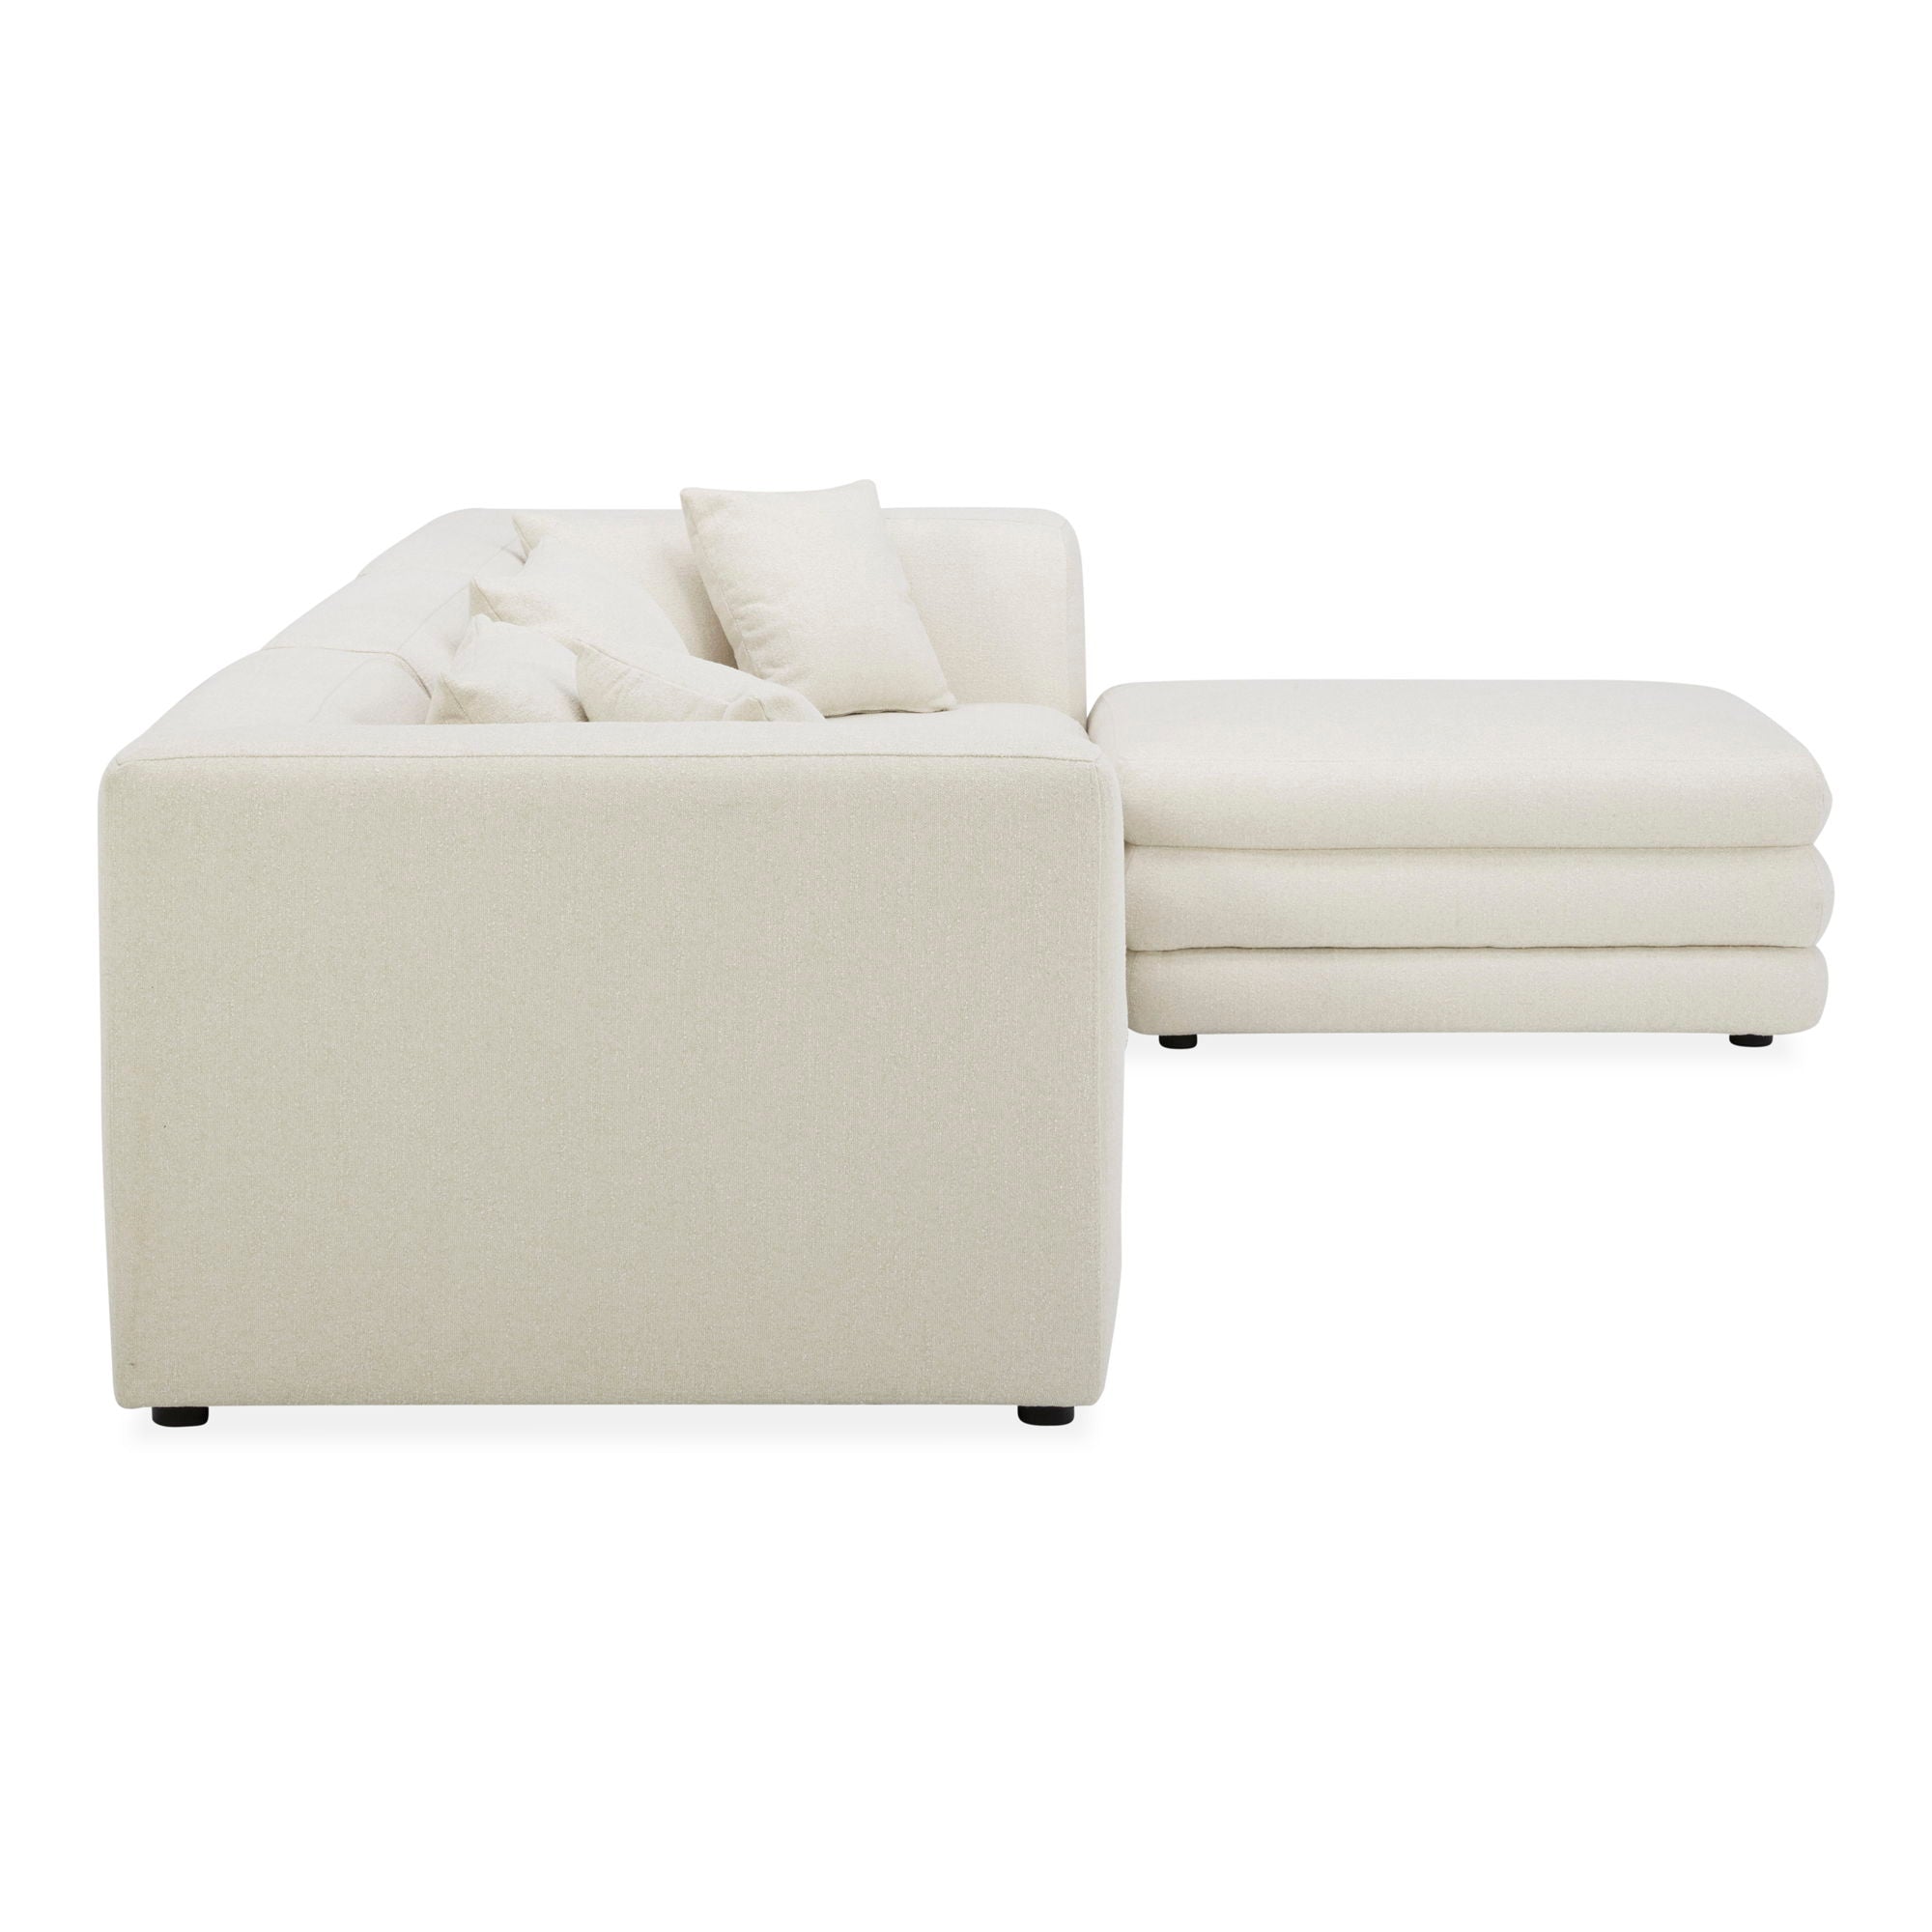 Lowtide - Lounge Modular Sectional - Warm White-Stationary Sectionals-American Furniture Outlet